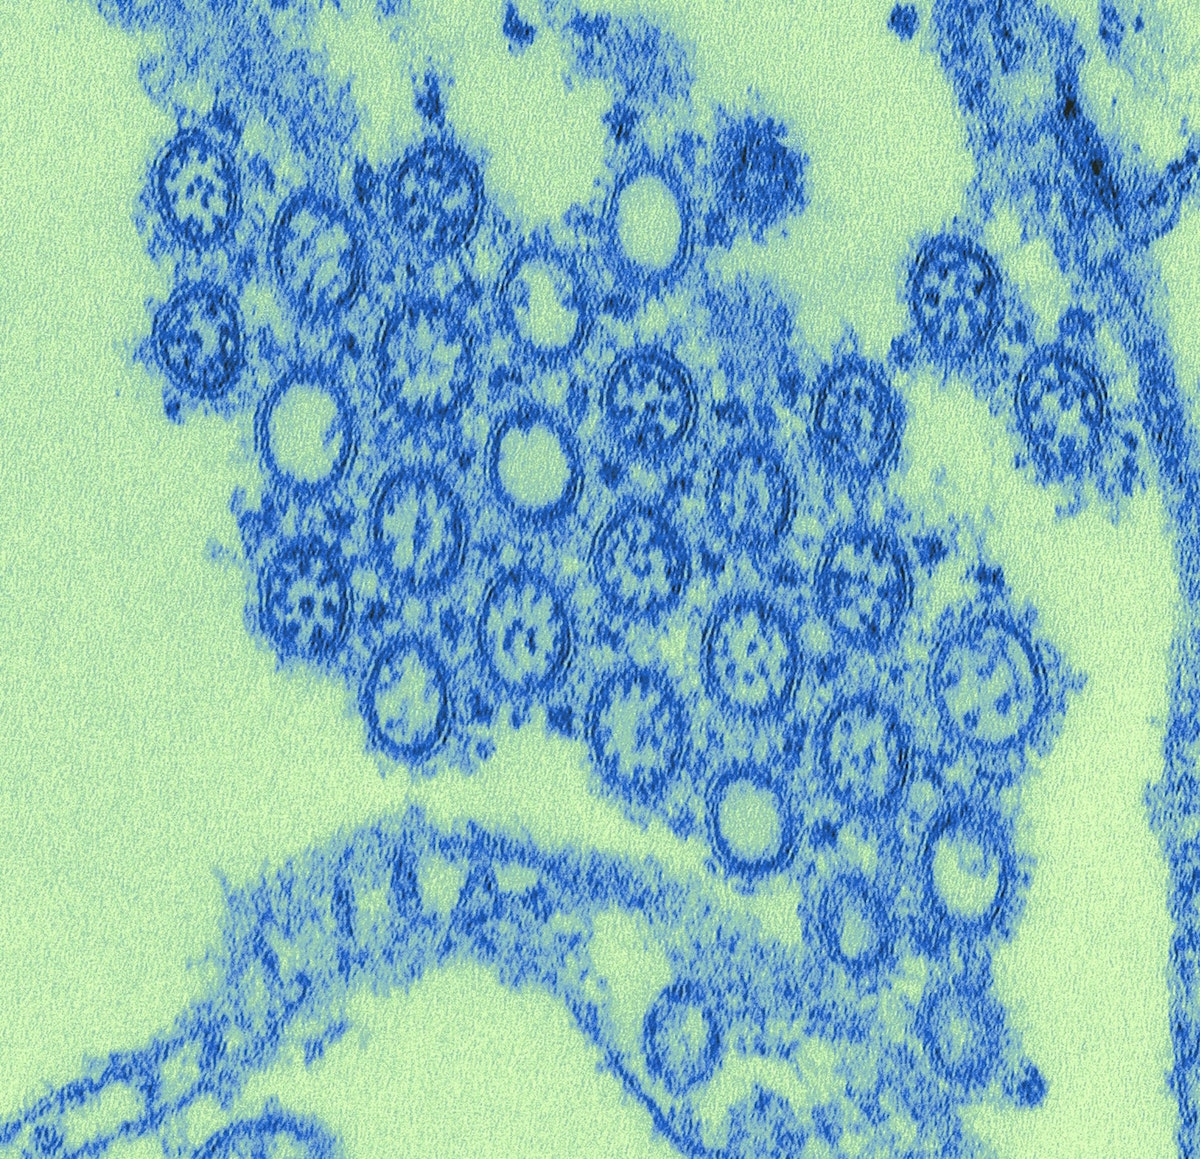 an electron microscope image of a thin section of the flu virus. there are many individual viruses seen here. the viruses are digitally colored blue and the background is a green blue